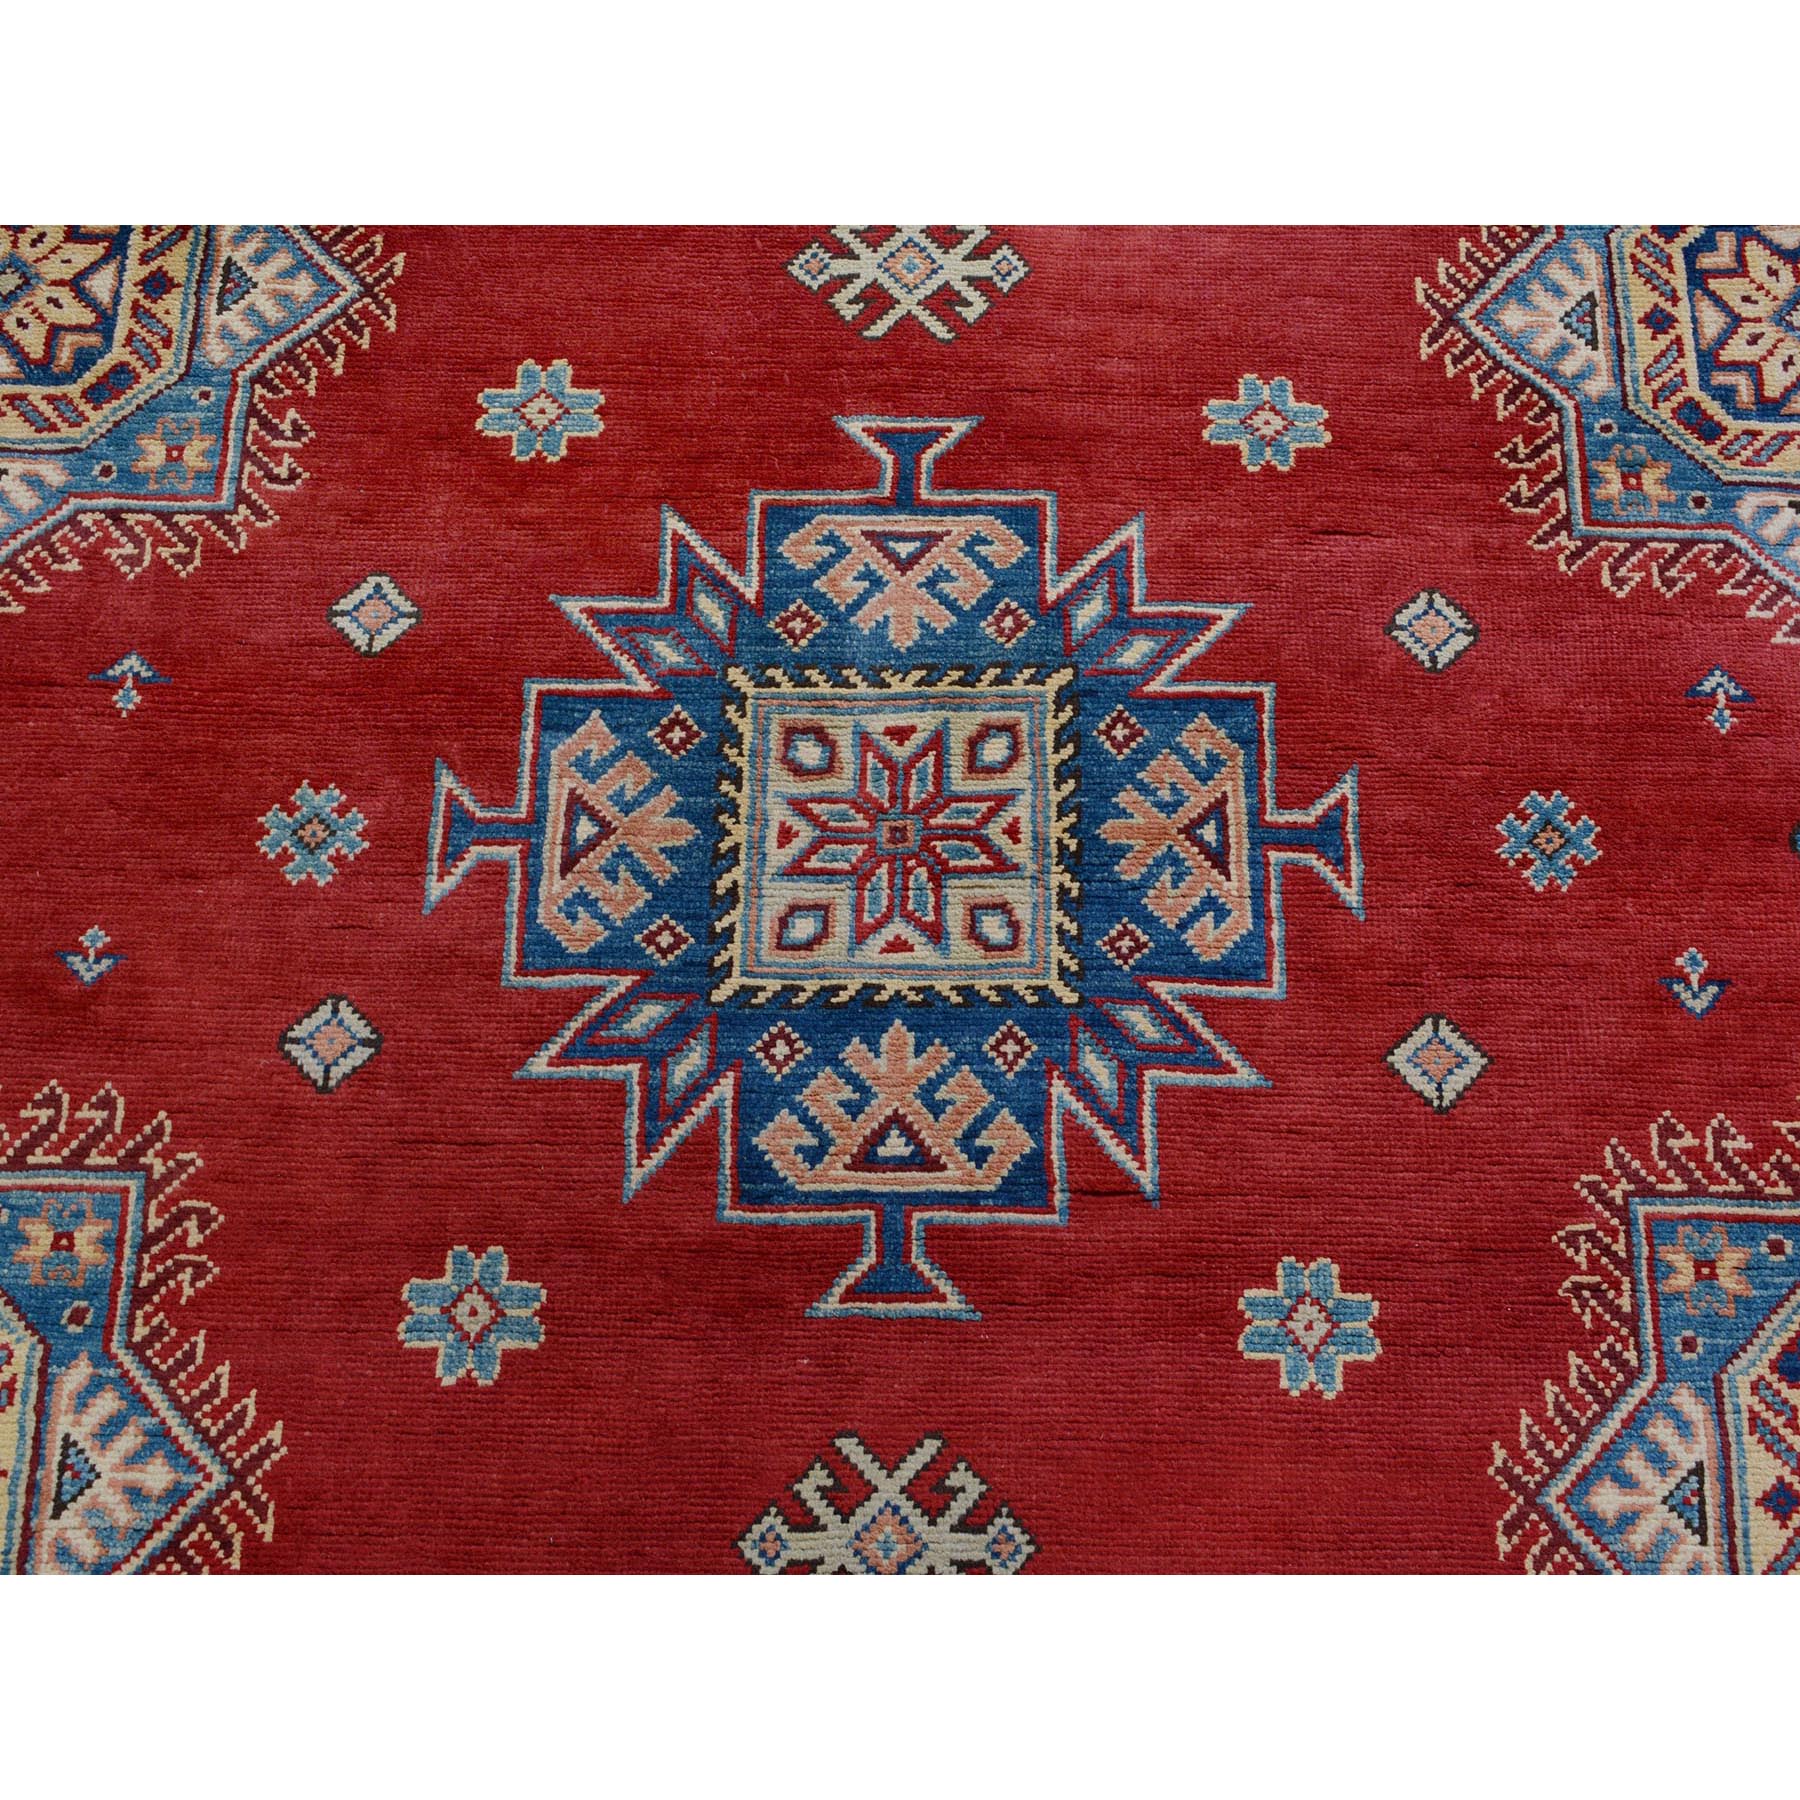 10-3 x14- Red Special kazak All Over Design Pure wool Hand Knotted Oriental Rug 